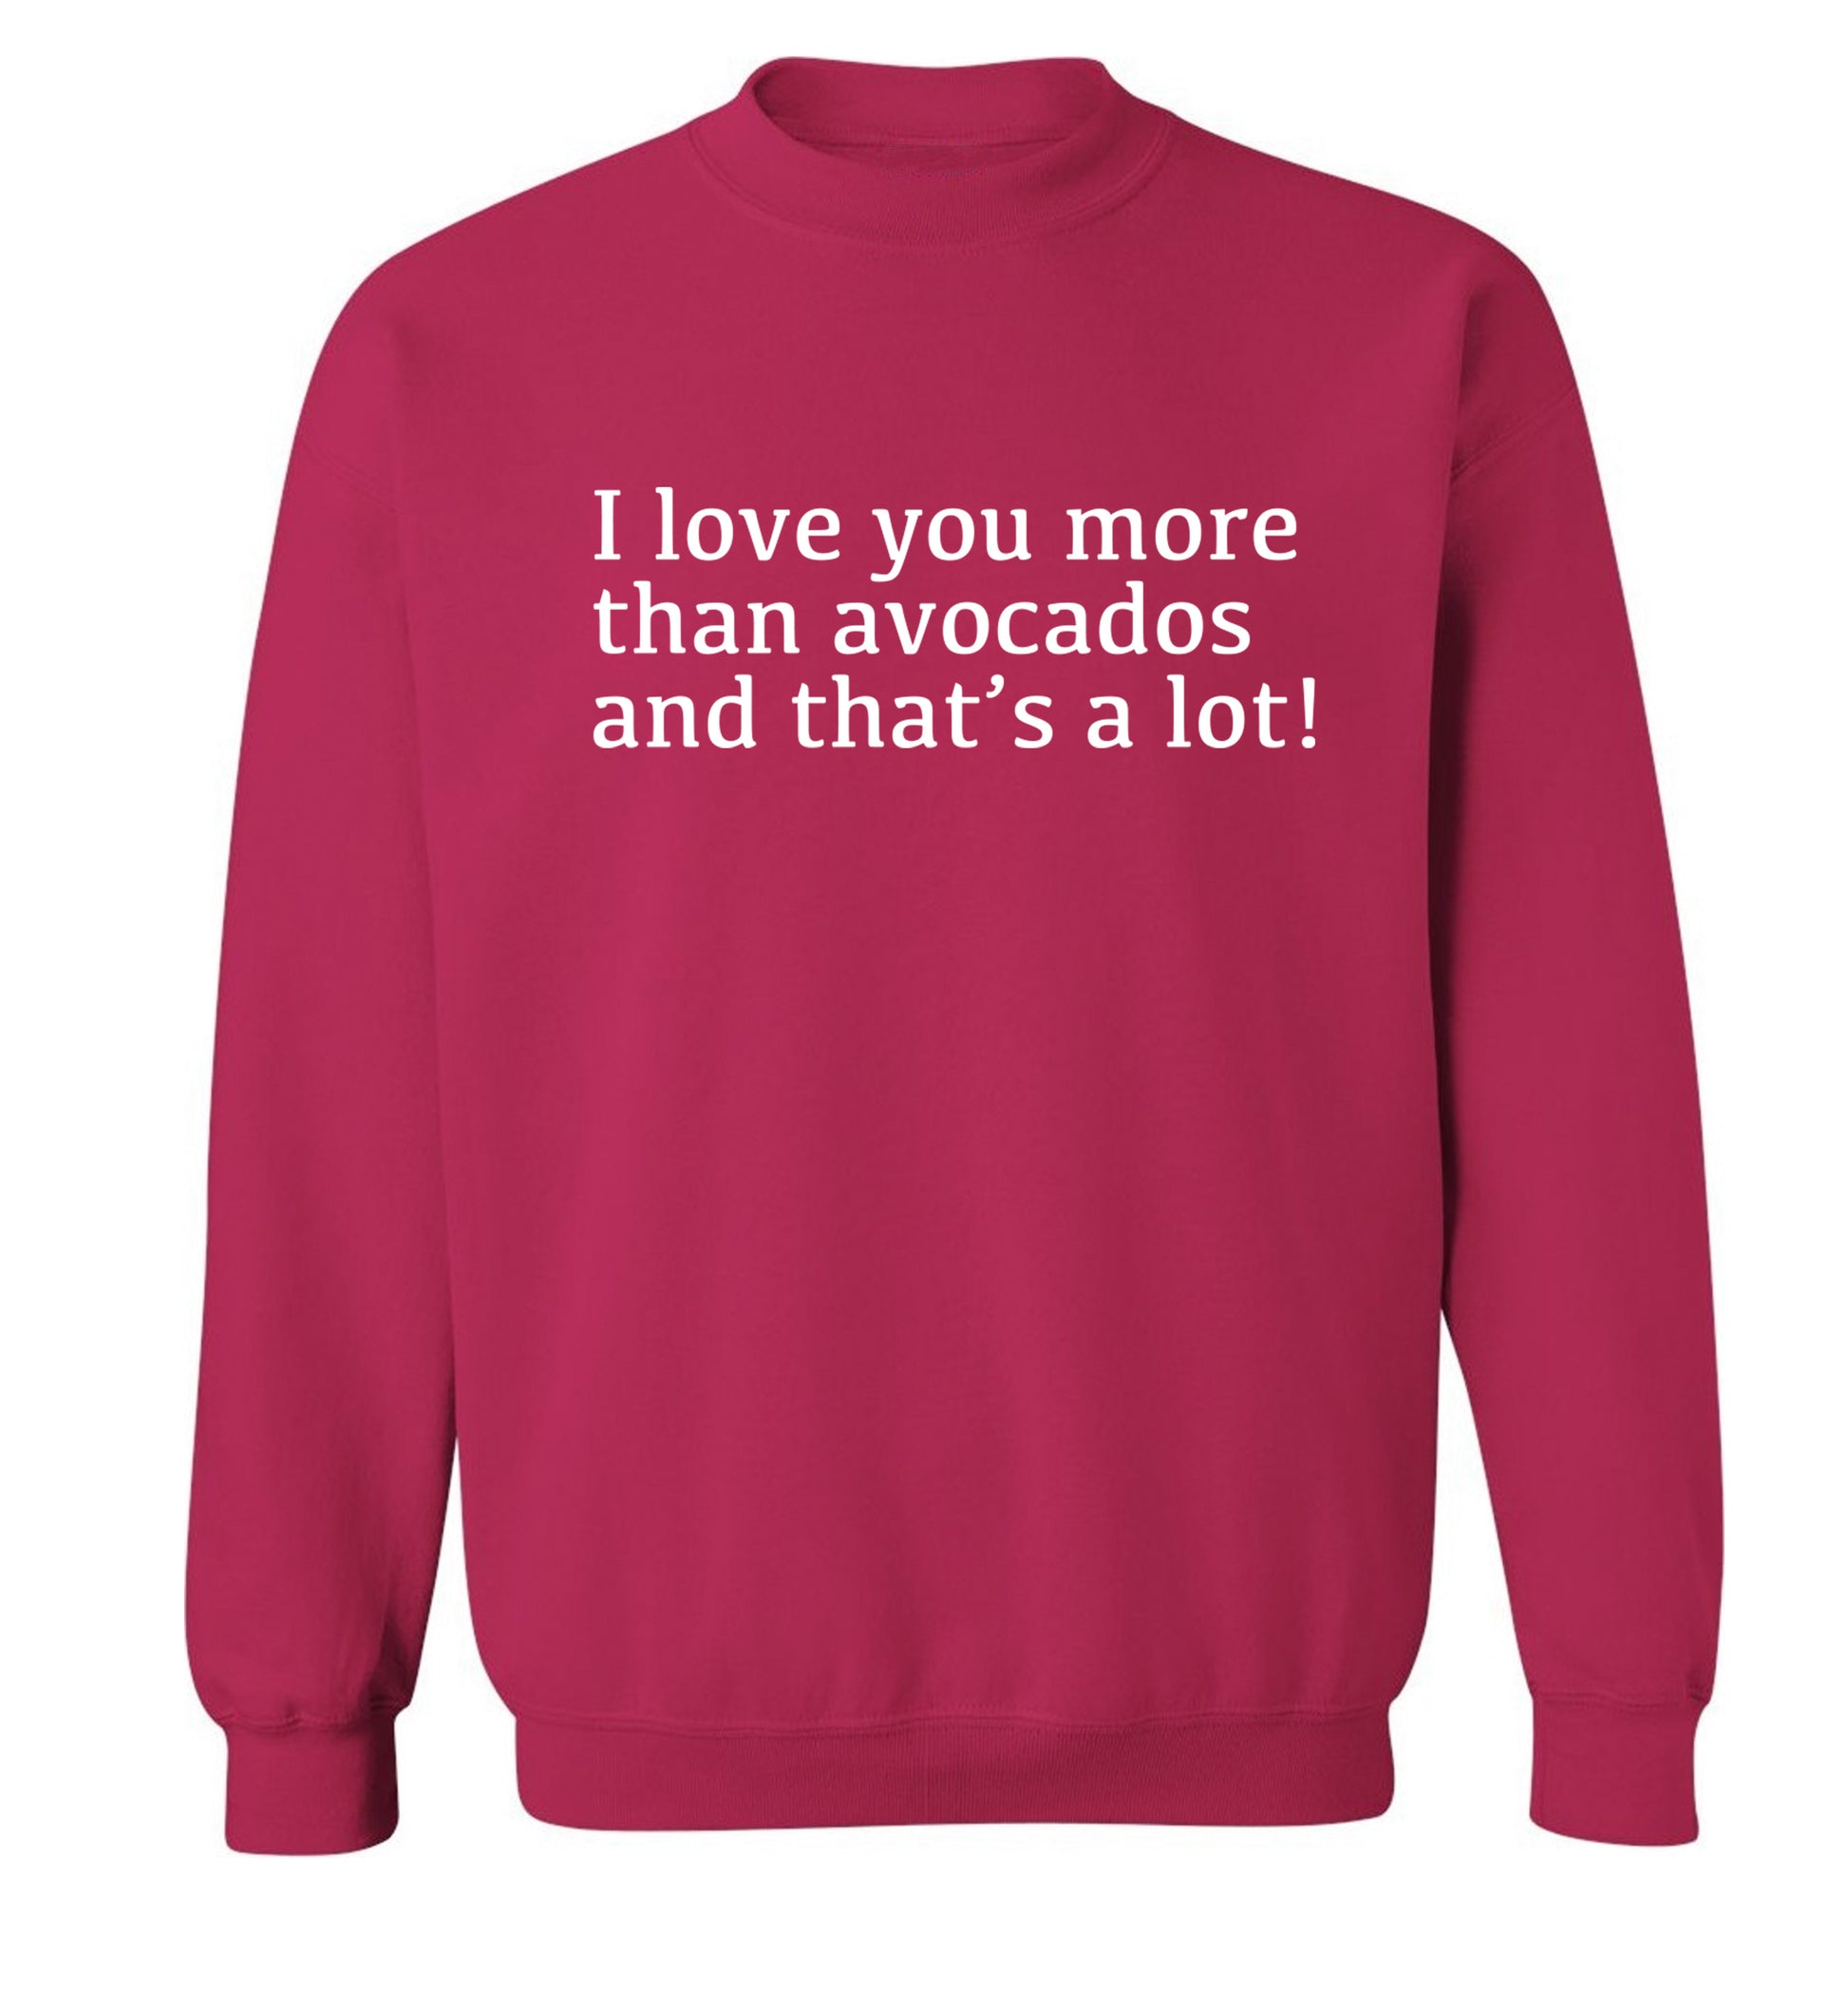 I love you more than avocados and that's a lot Adult's unisex pink Sweater 2XL